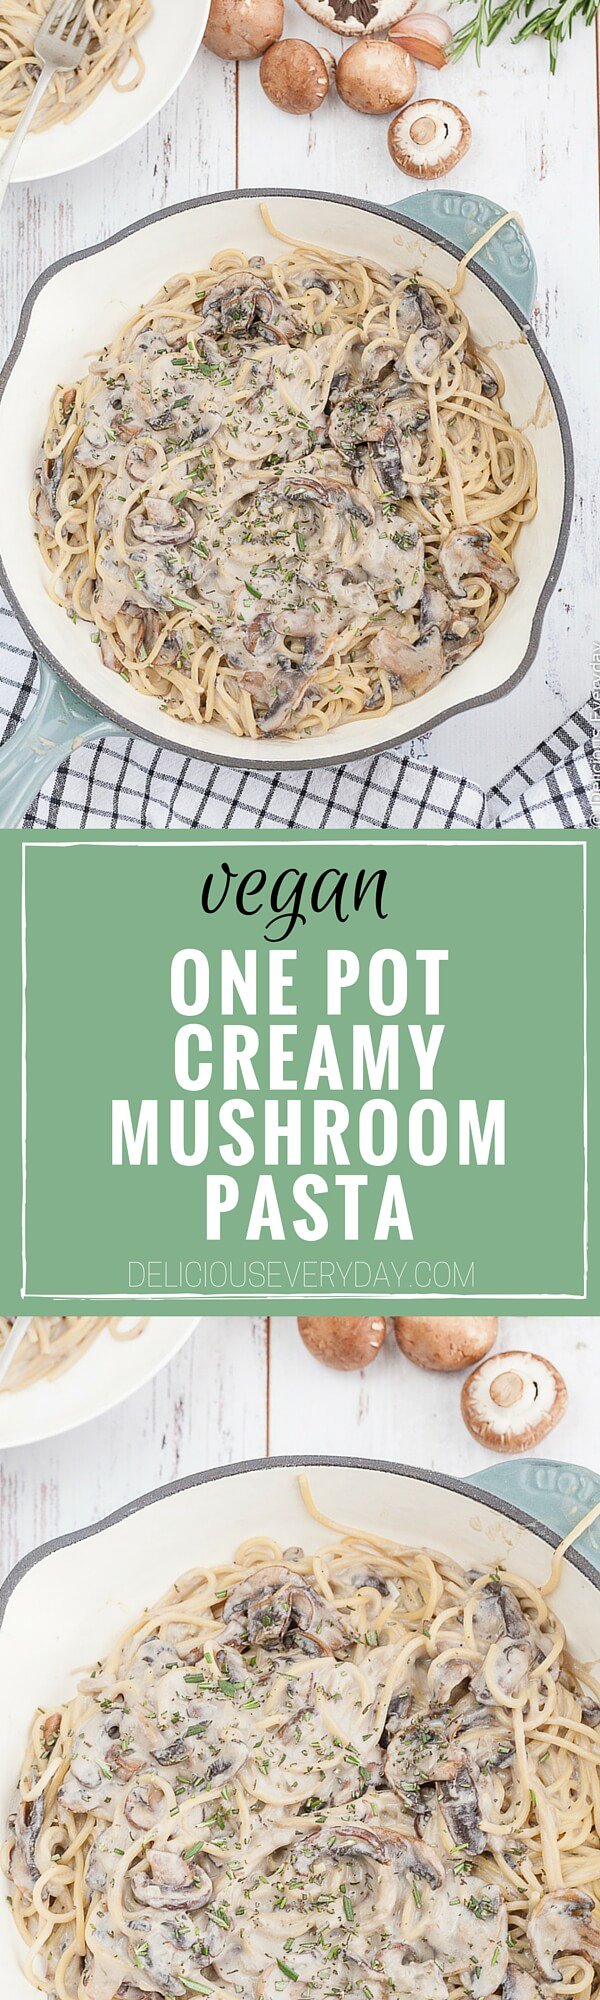 VEGAN one pot creamy mushroom pasta - All you need is 20 minutes to make this super easy Vegan One Pot Creamy Mushroom Pasta is a handful of simple ingredients! | click for the recipe